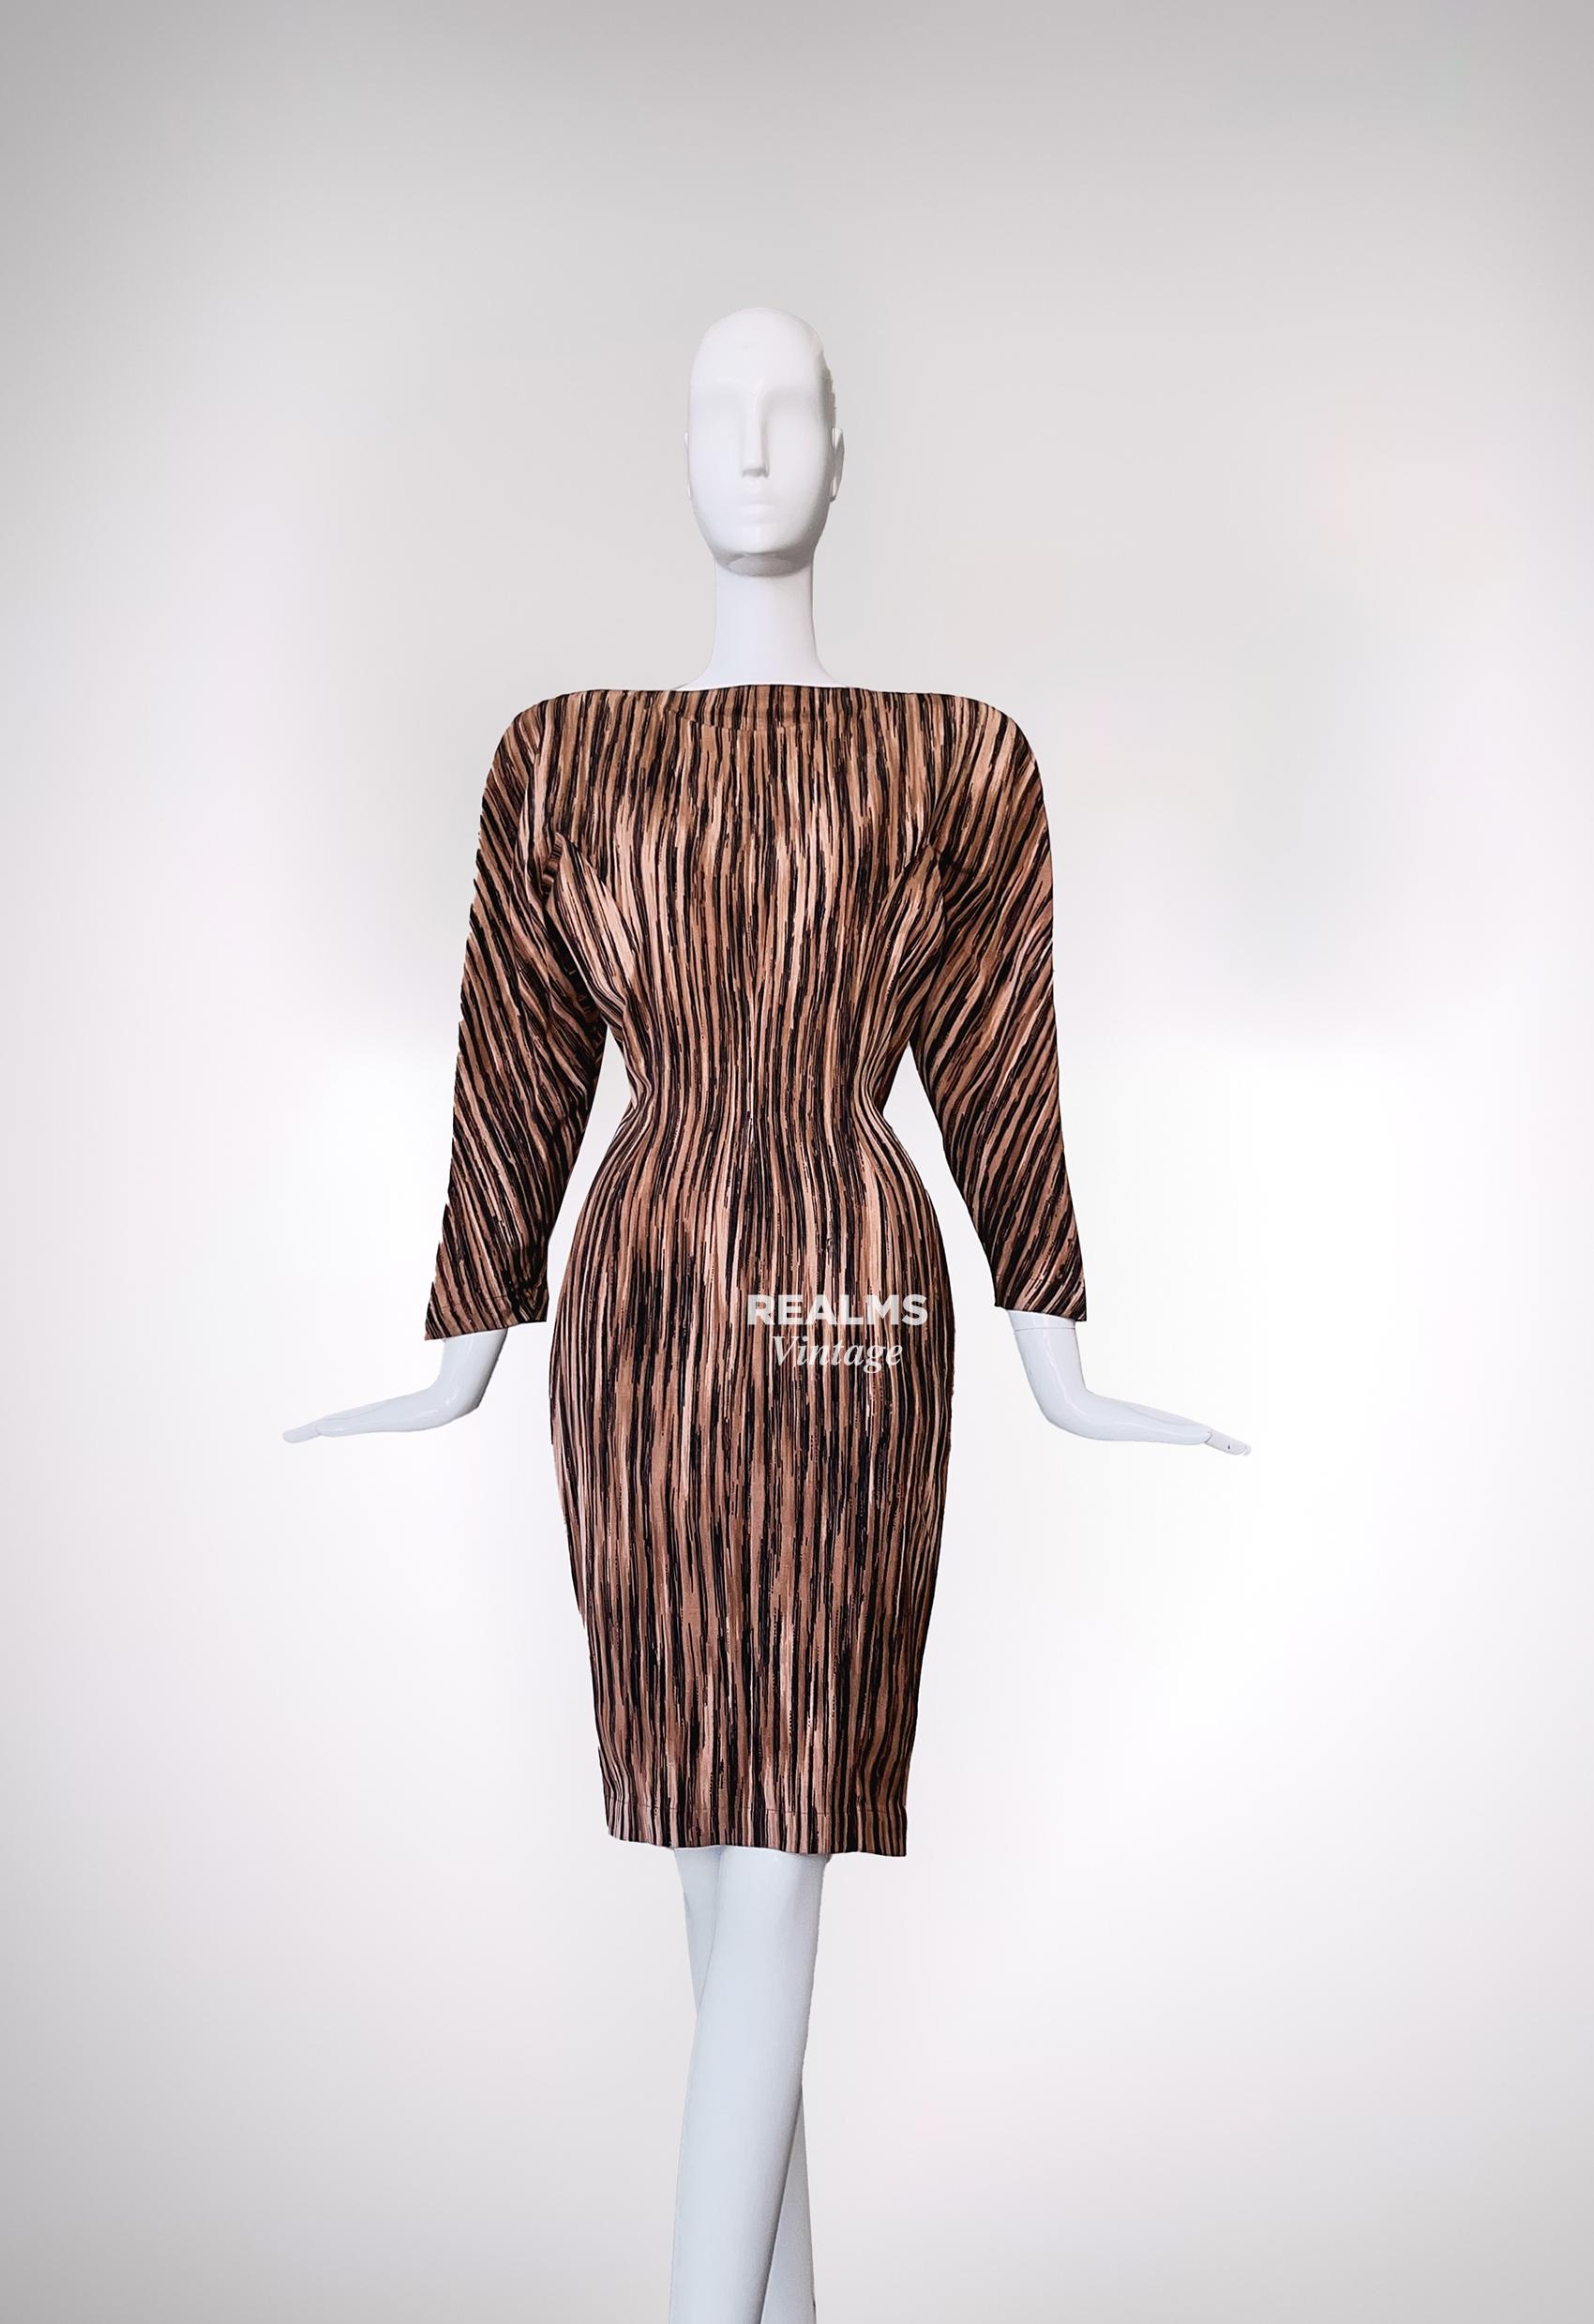 Black Rare Thierry Mugler SS 1988 Iconic African Collection Sculptural Dress For Sale